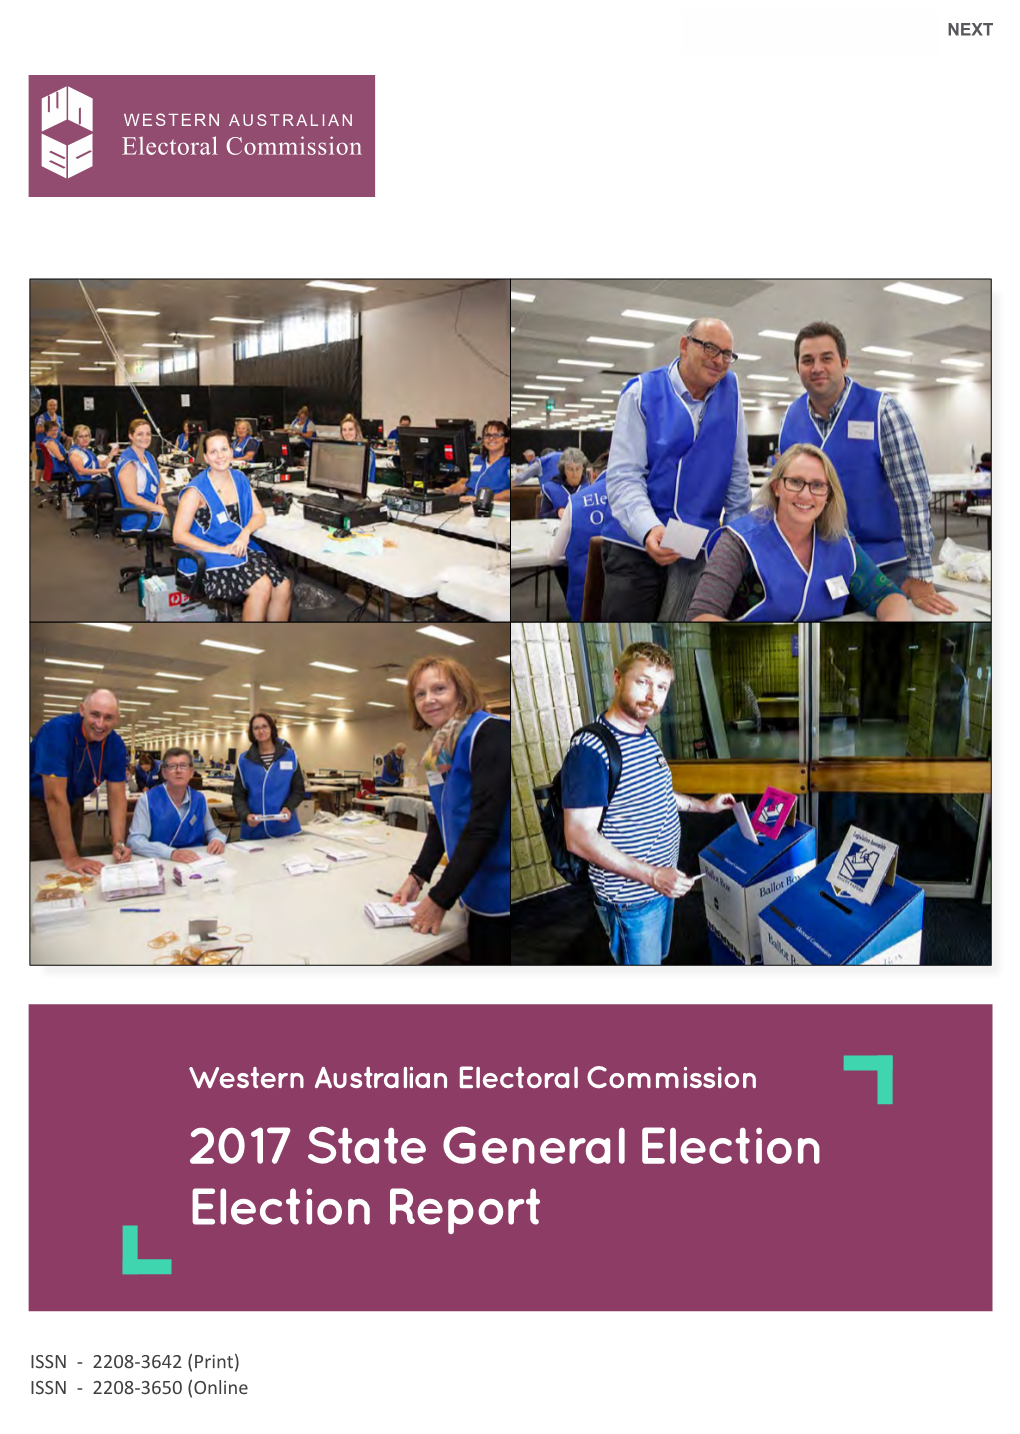 Report on the 2017 State General Election